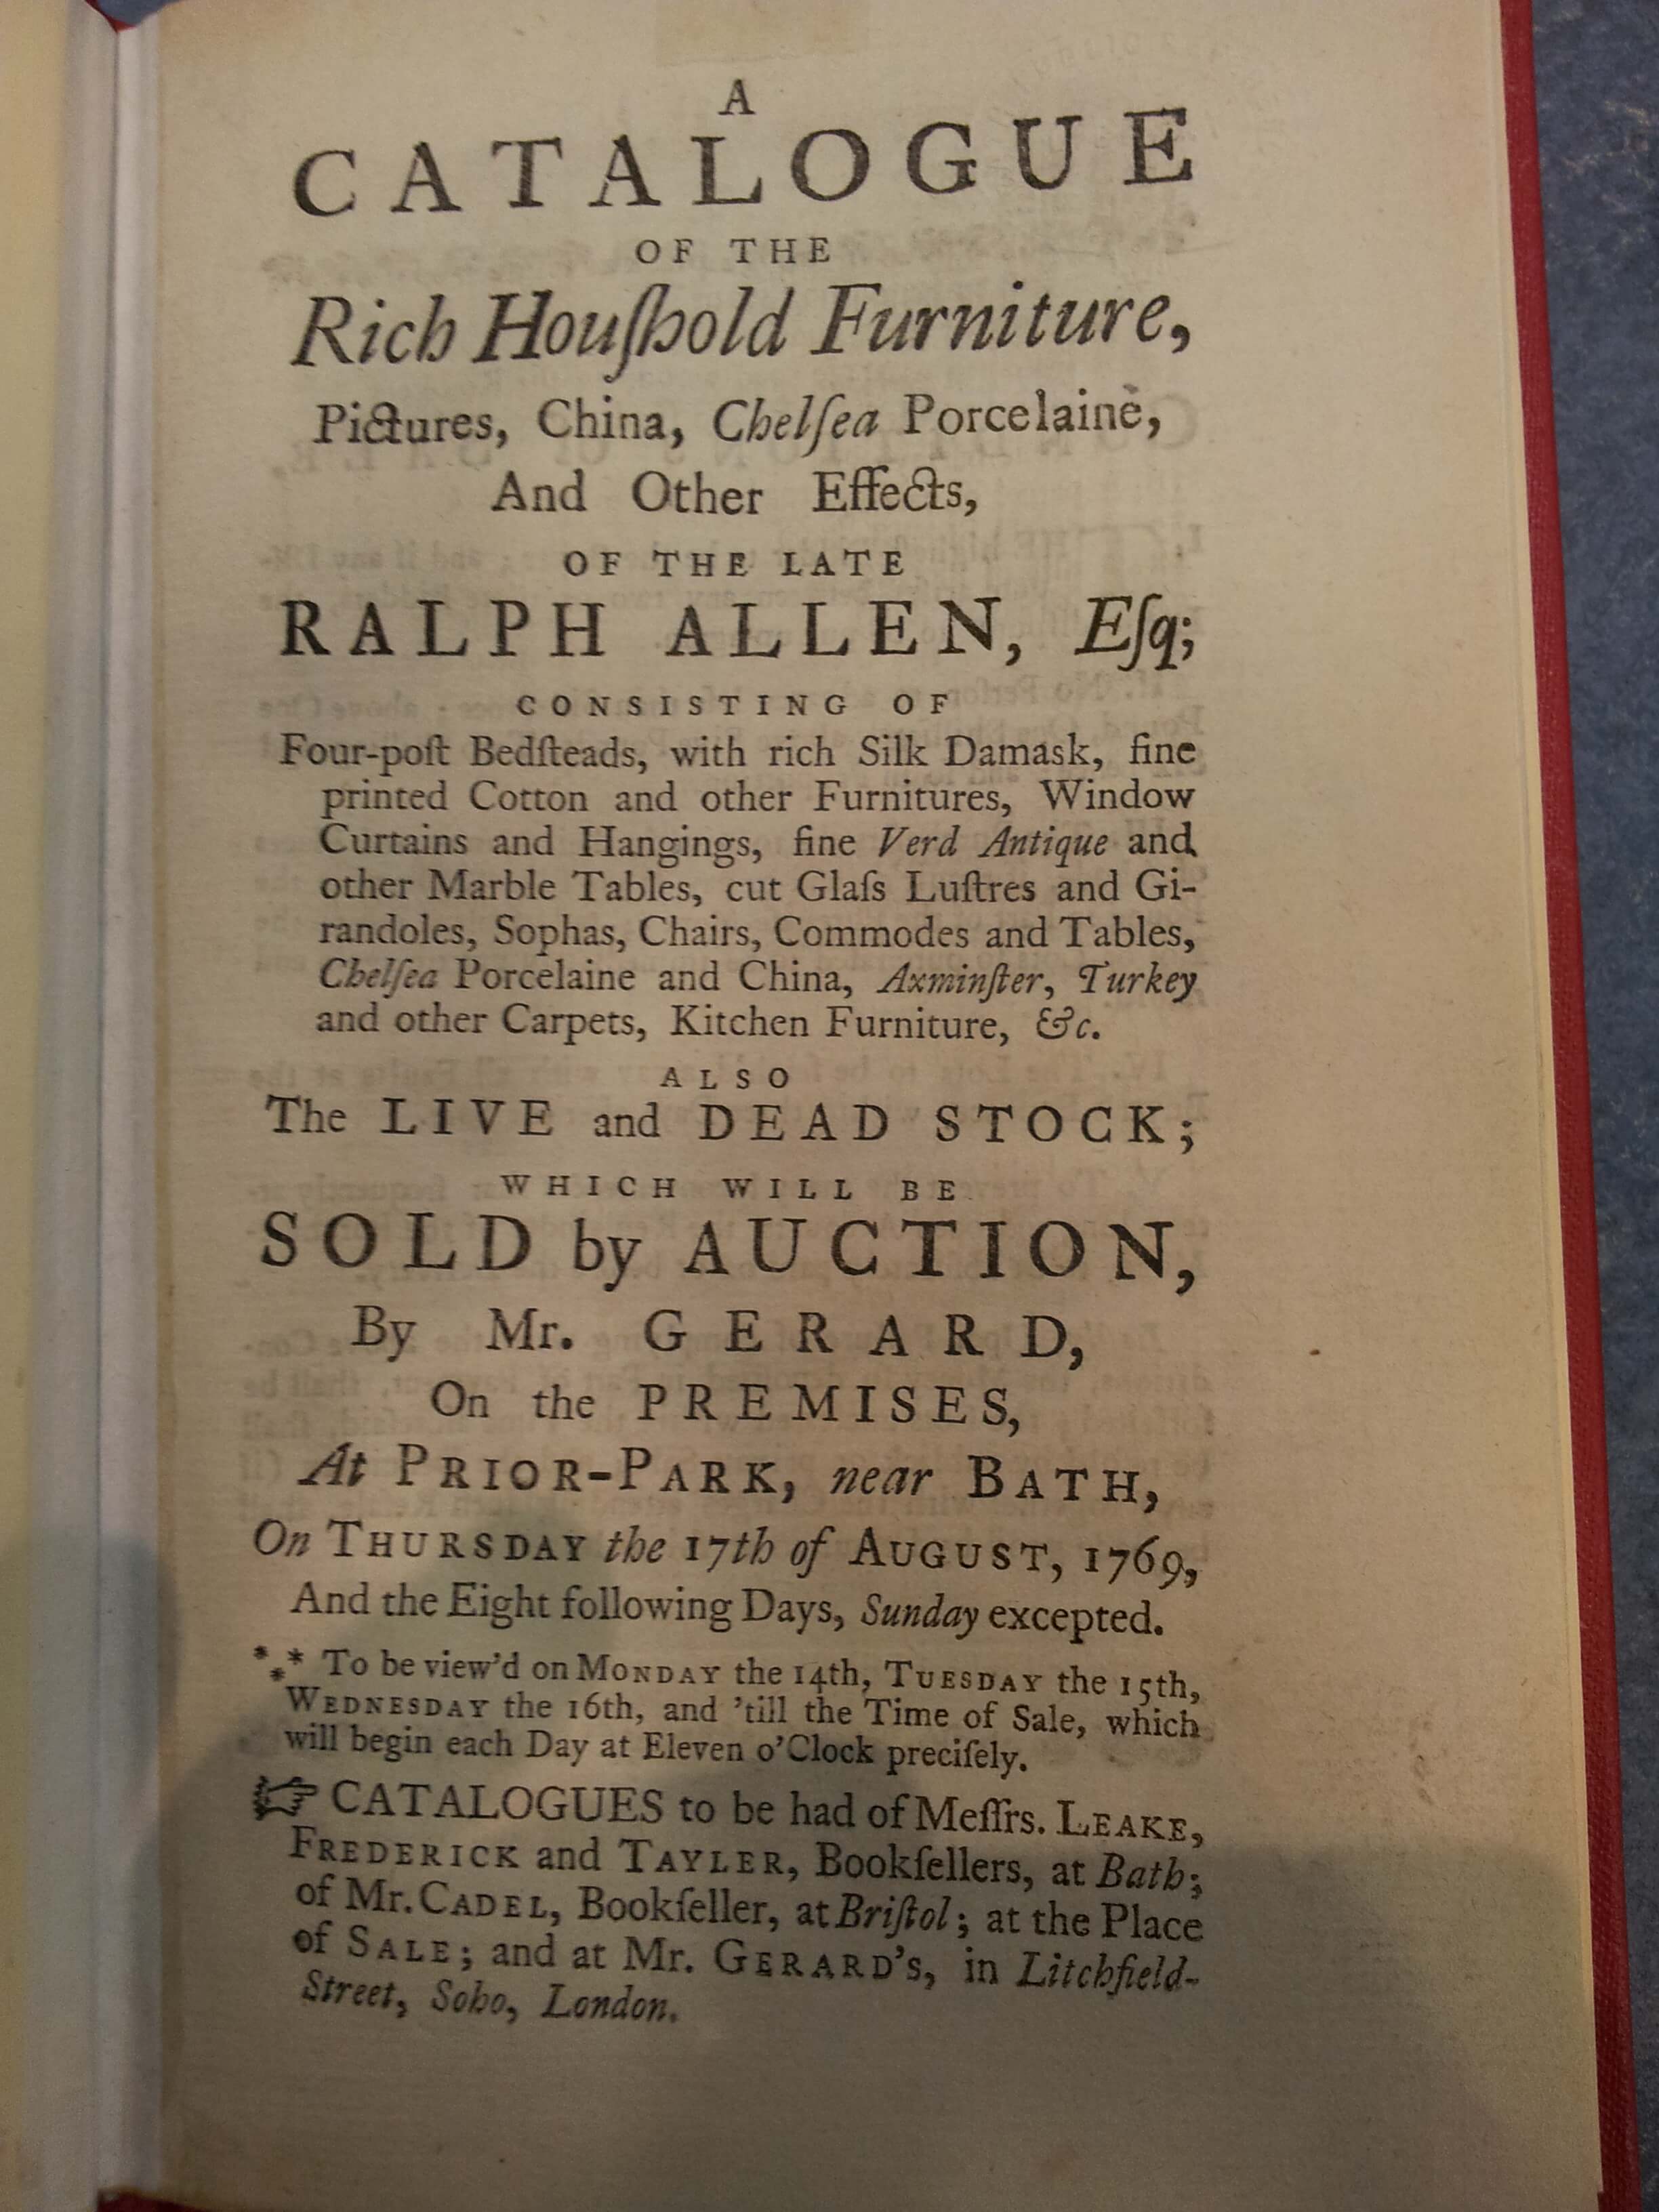 The front of the 1769 Prior Park sale catalogue